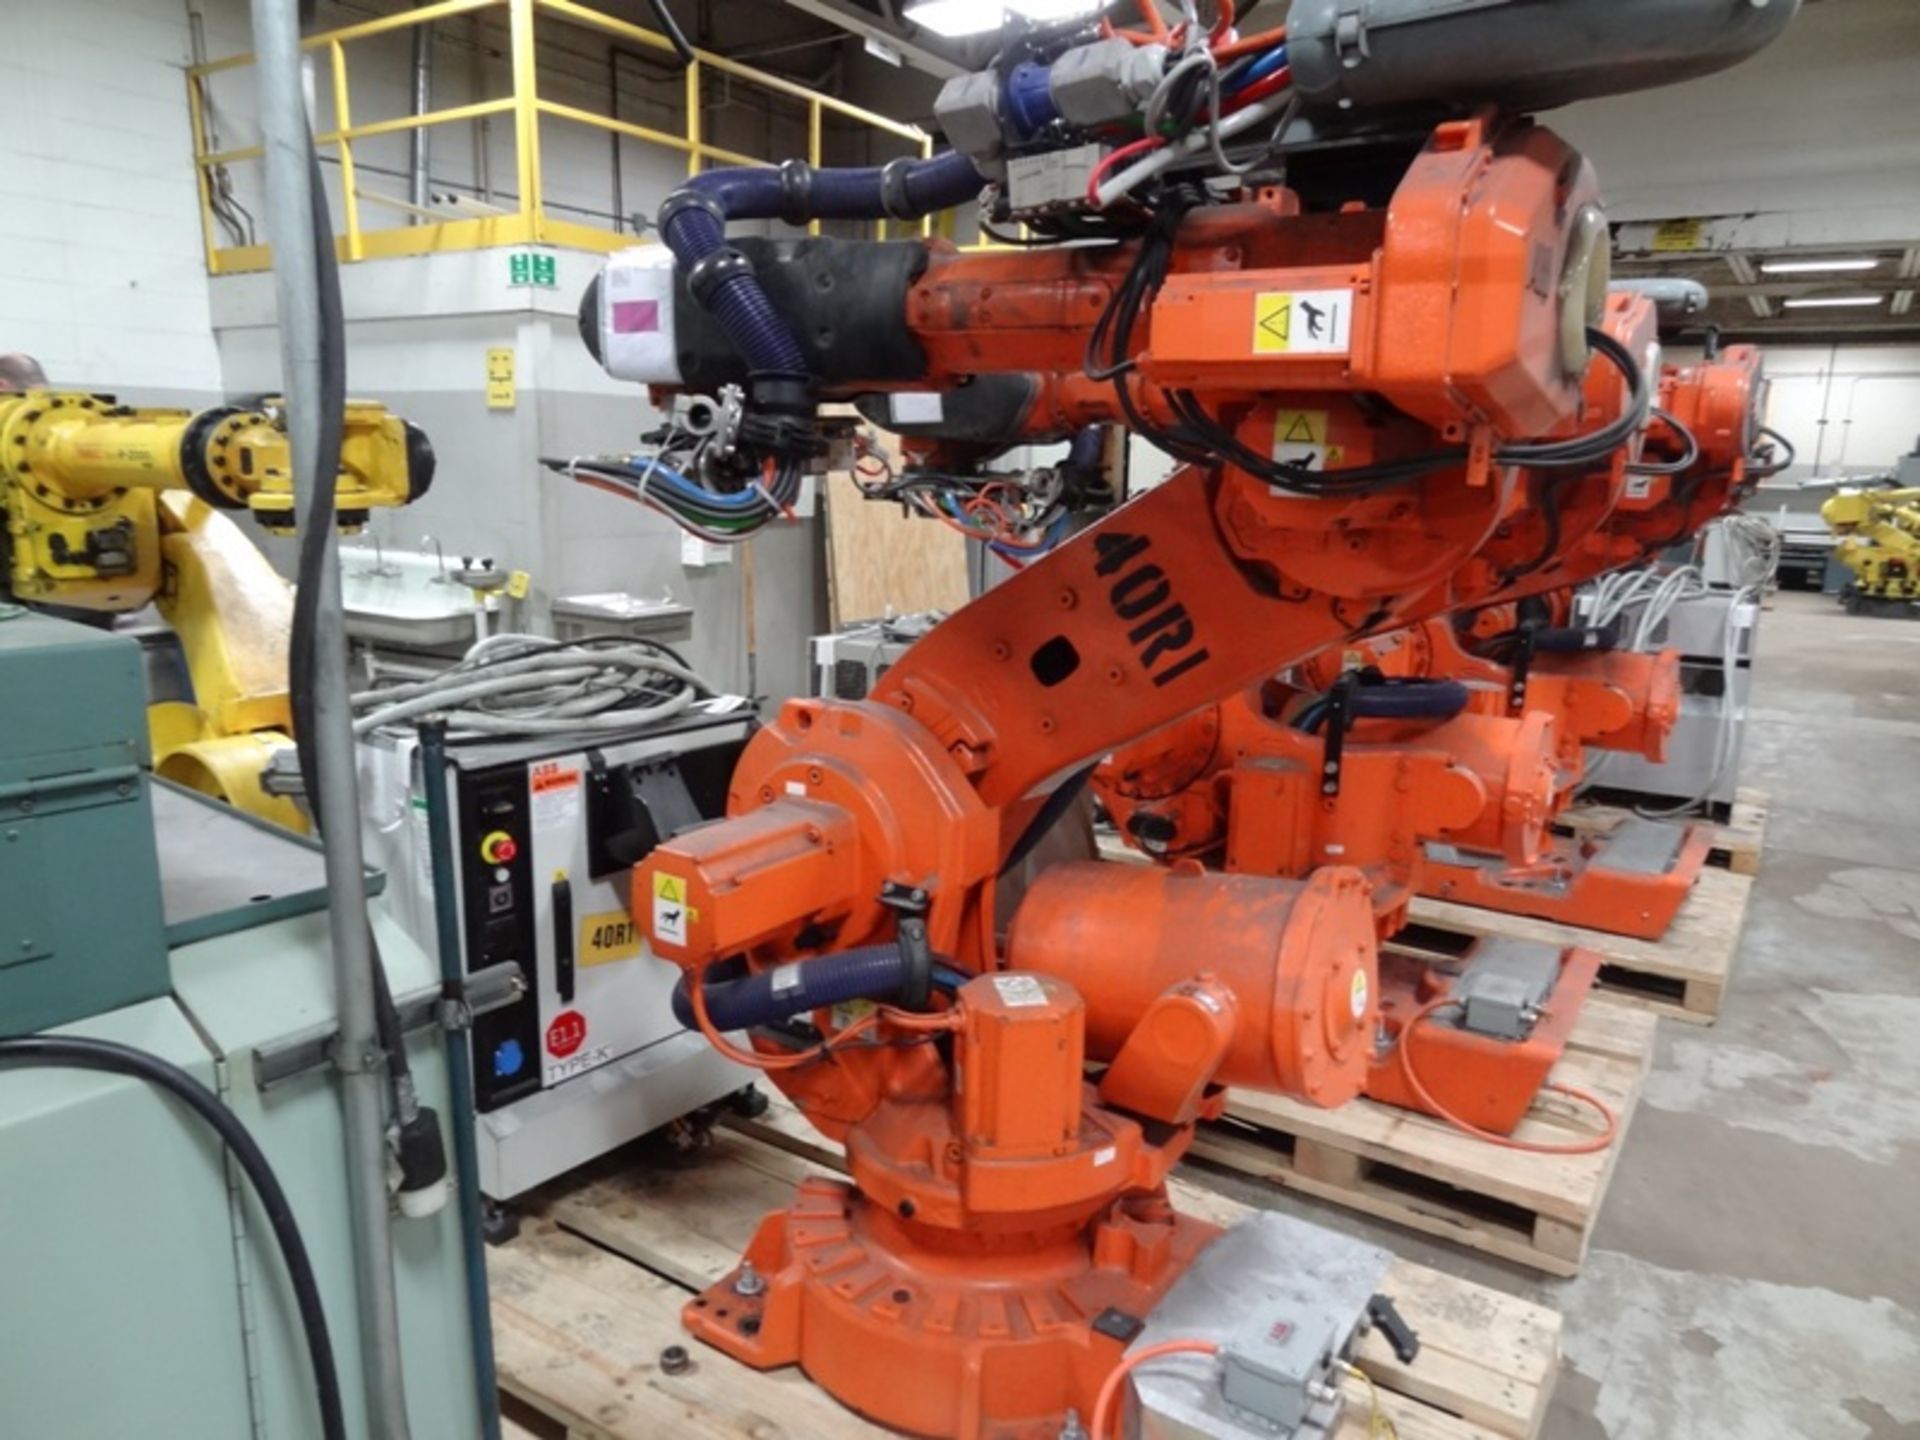 ABB ROBOT IRB 6640-235/2.55 WITH IRC 5 CONTROLS, CABLES & TEACH, YEAR 2012, SM 66-82938, LOCATION MI